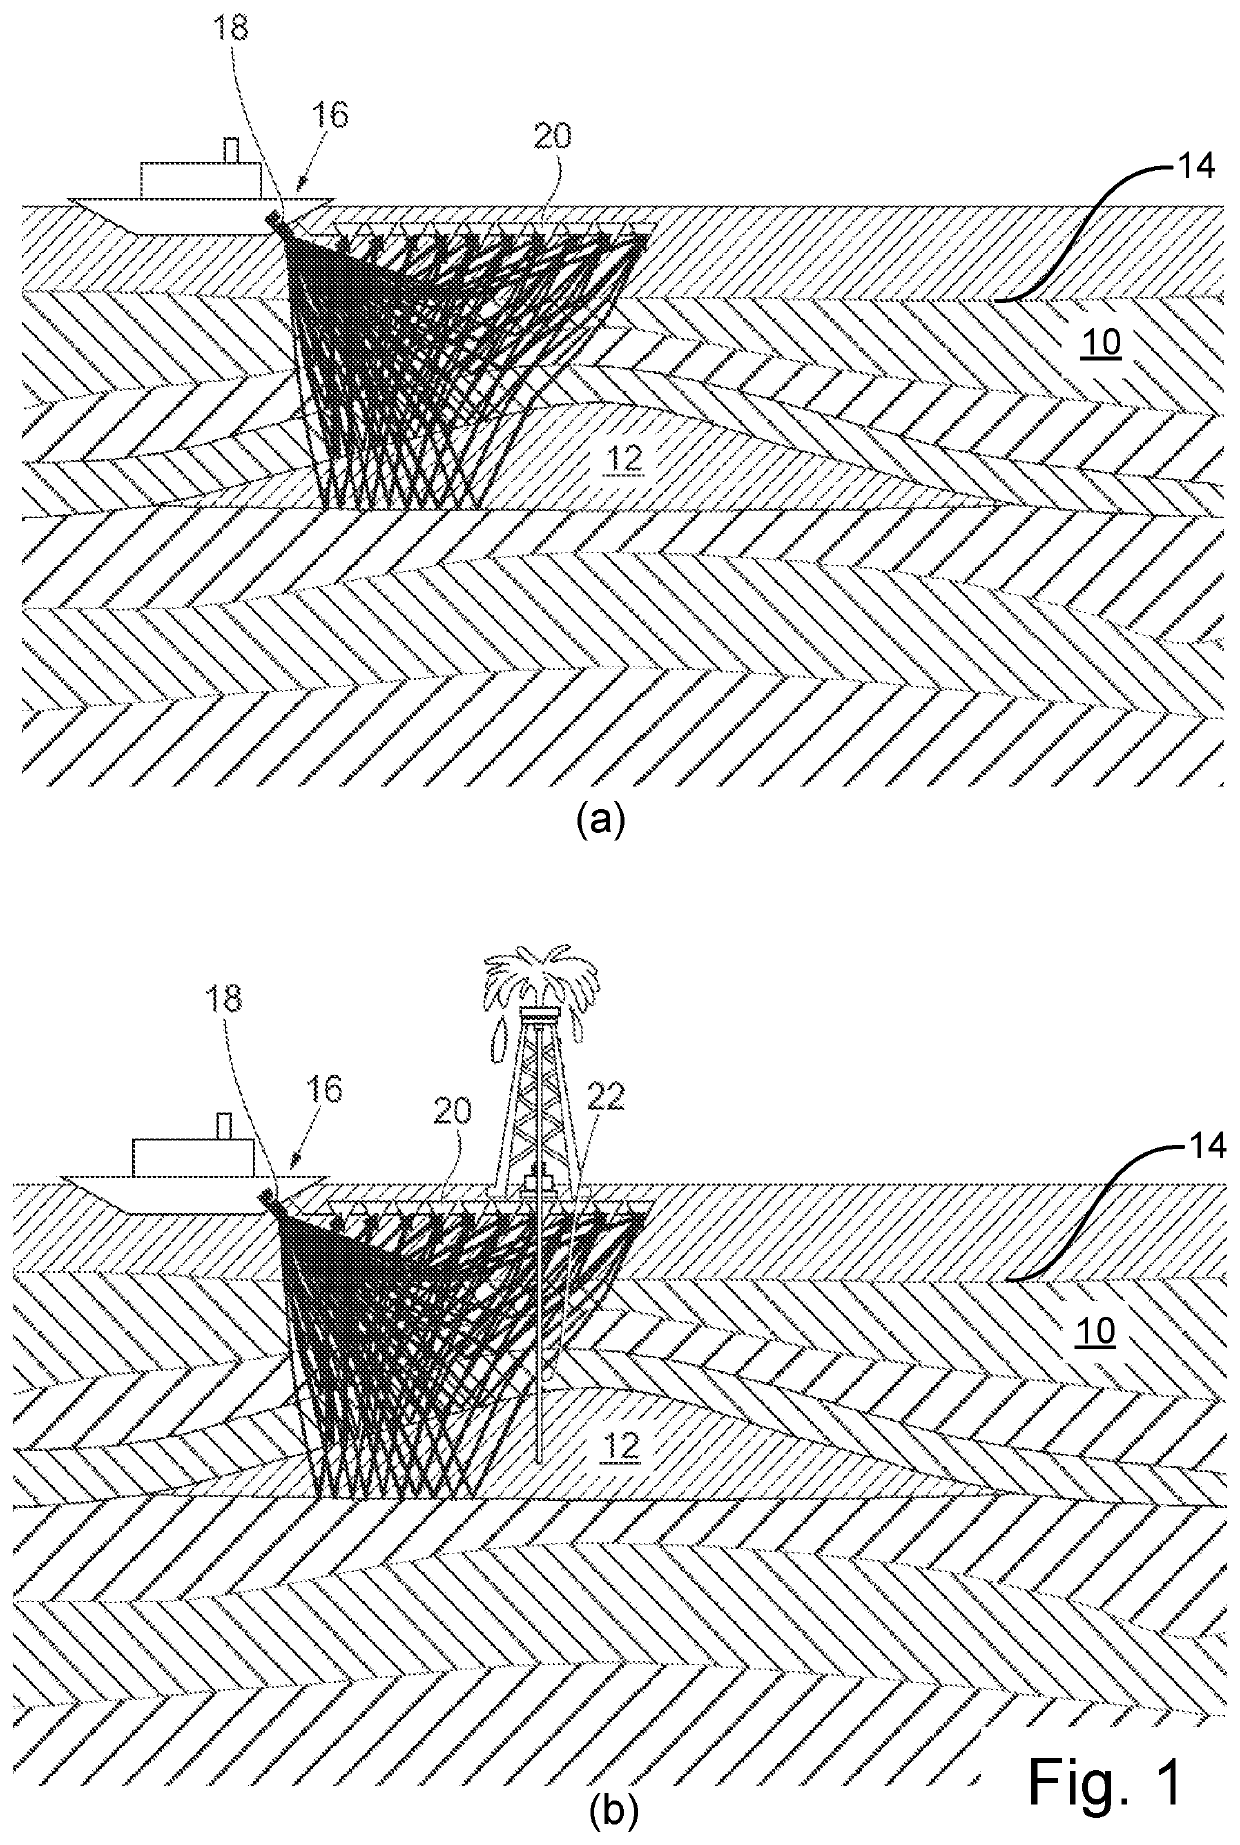 Method for obtaining estimates of a model parameter so as to characterise the evolution of a subsurface volume over a time period using time-lapse seismic